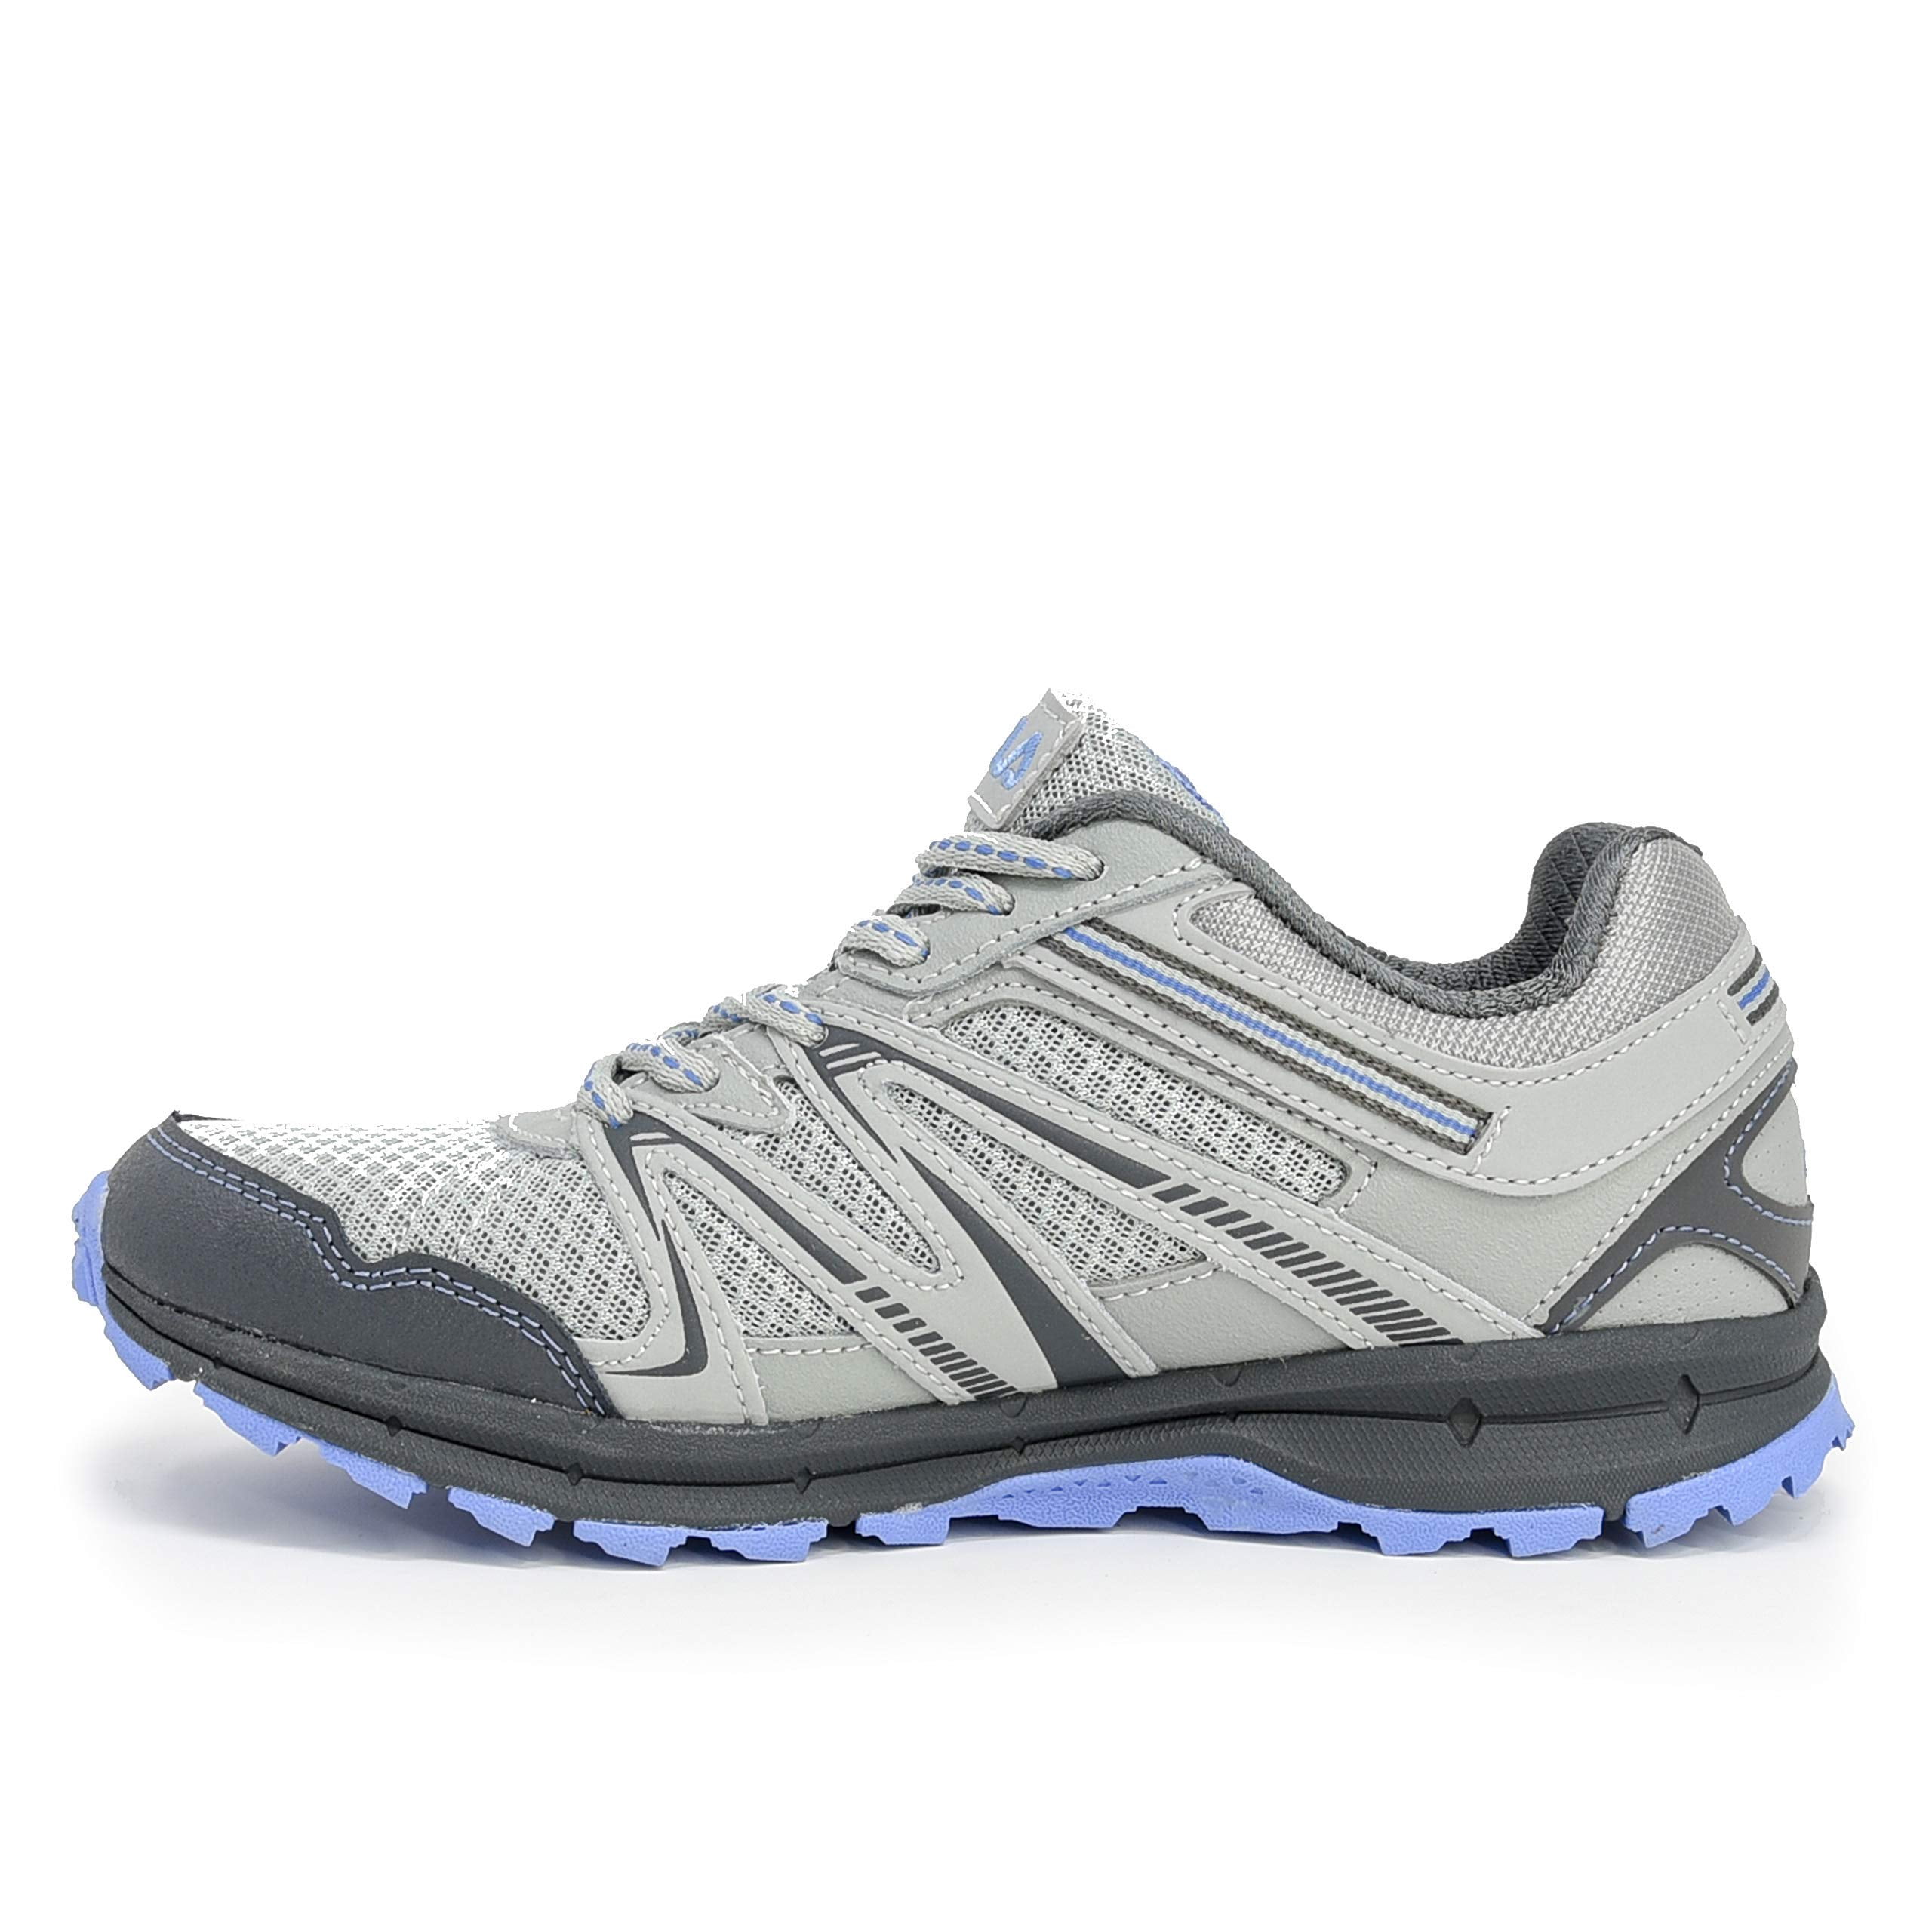 Trail Running Hiking Shoes 